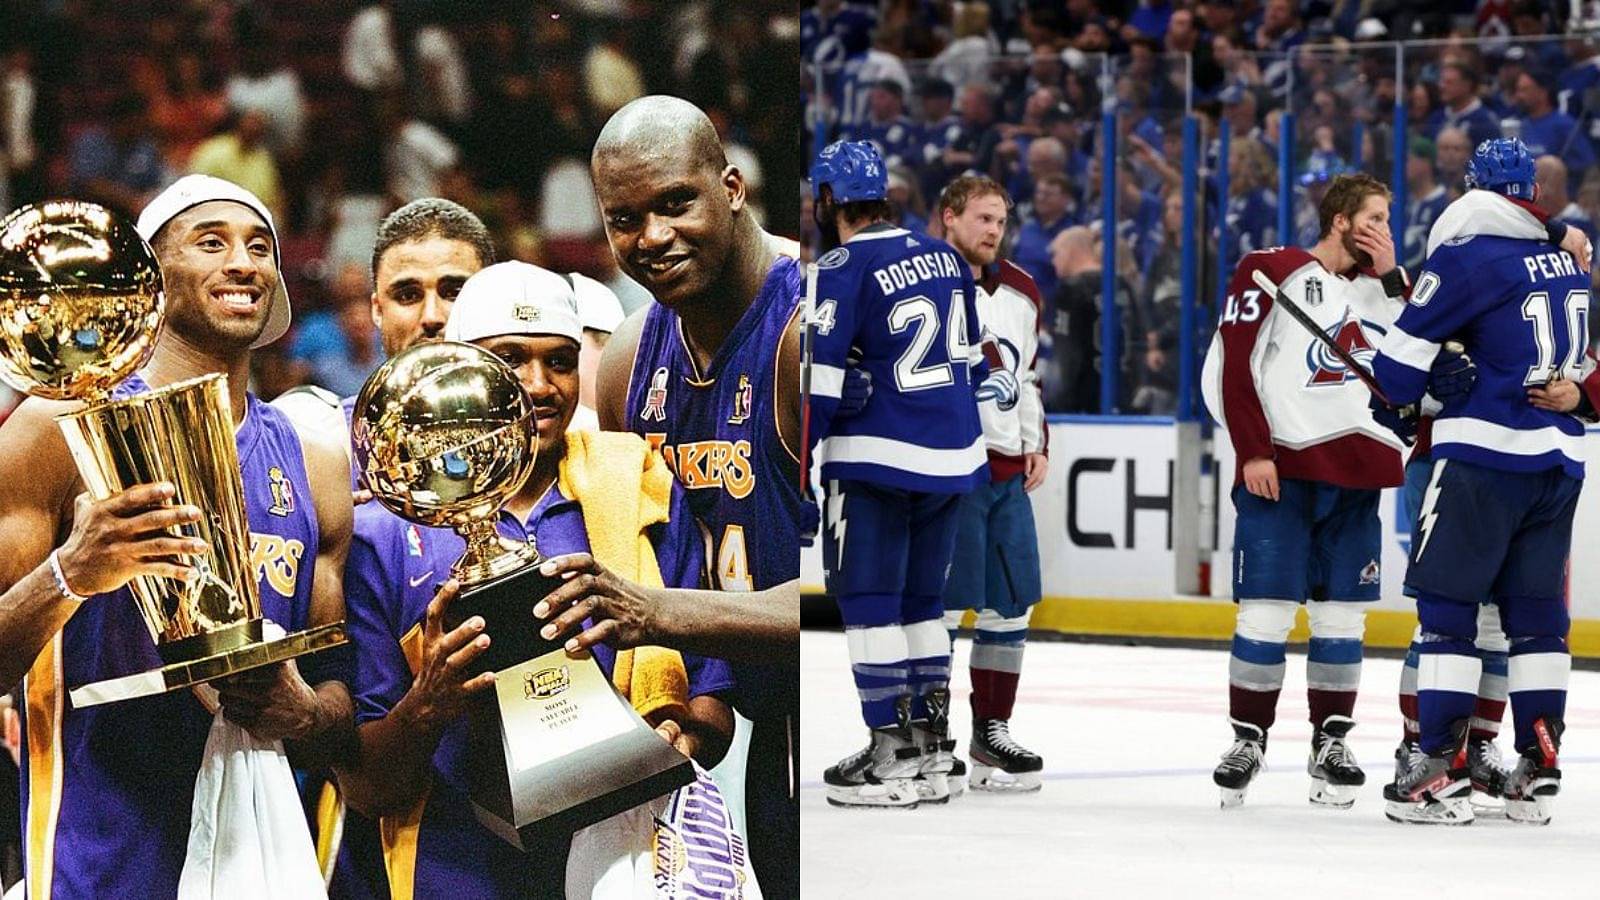 “Shaquille O’Neal and Kobe Bryant’s Lakers are the last professional sports team to 3-peat”: ESPN notices something remarkable as Tampa Bay Lightning lost the Stanley Cup